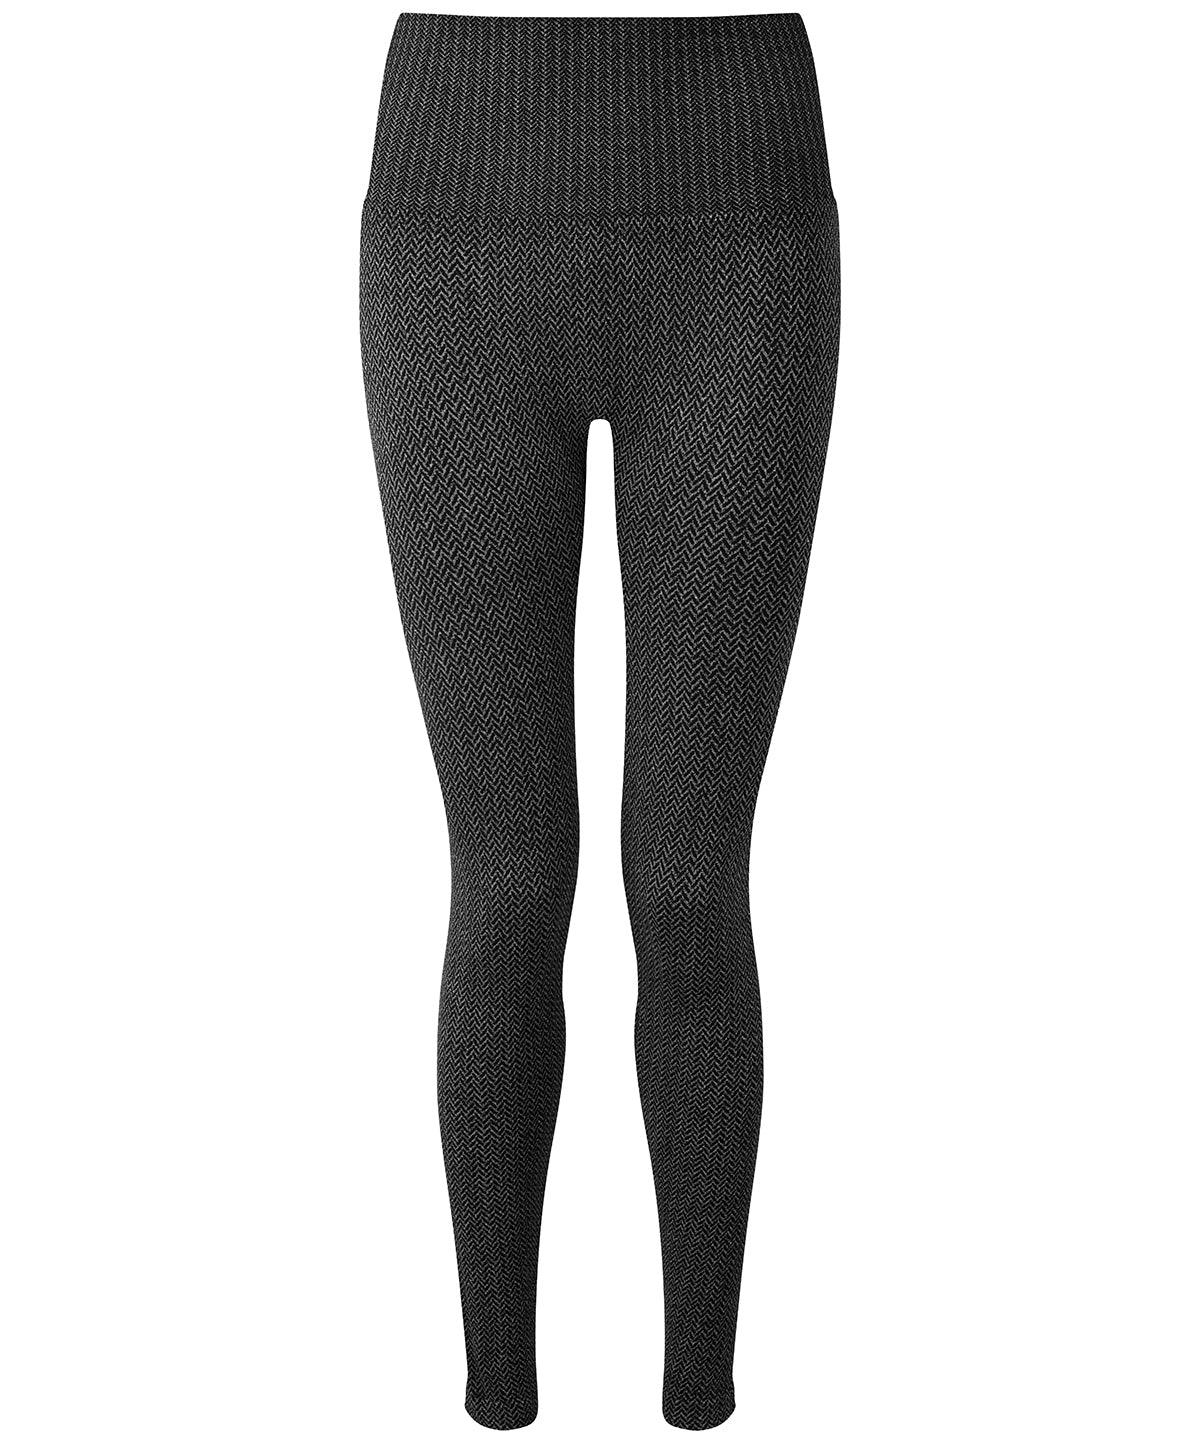 Charcoal - Women's TriDri® knitted city leggings Leggings TriDri® Activewear & Performance, Exclusives, Fashion Leggings, Leggings, Lounge Sets, New For 2021, New Styles For 2021, Rebrandable, Sports & Leisure Schoolwear Centres